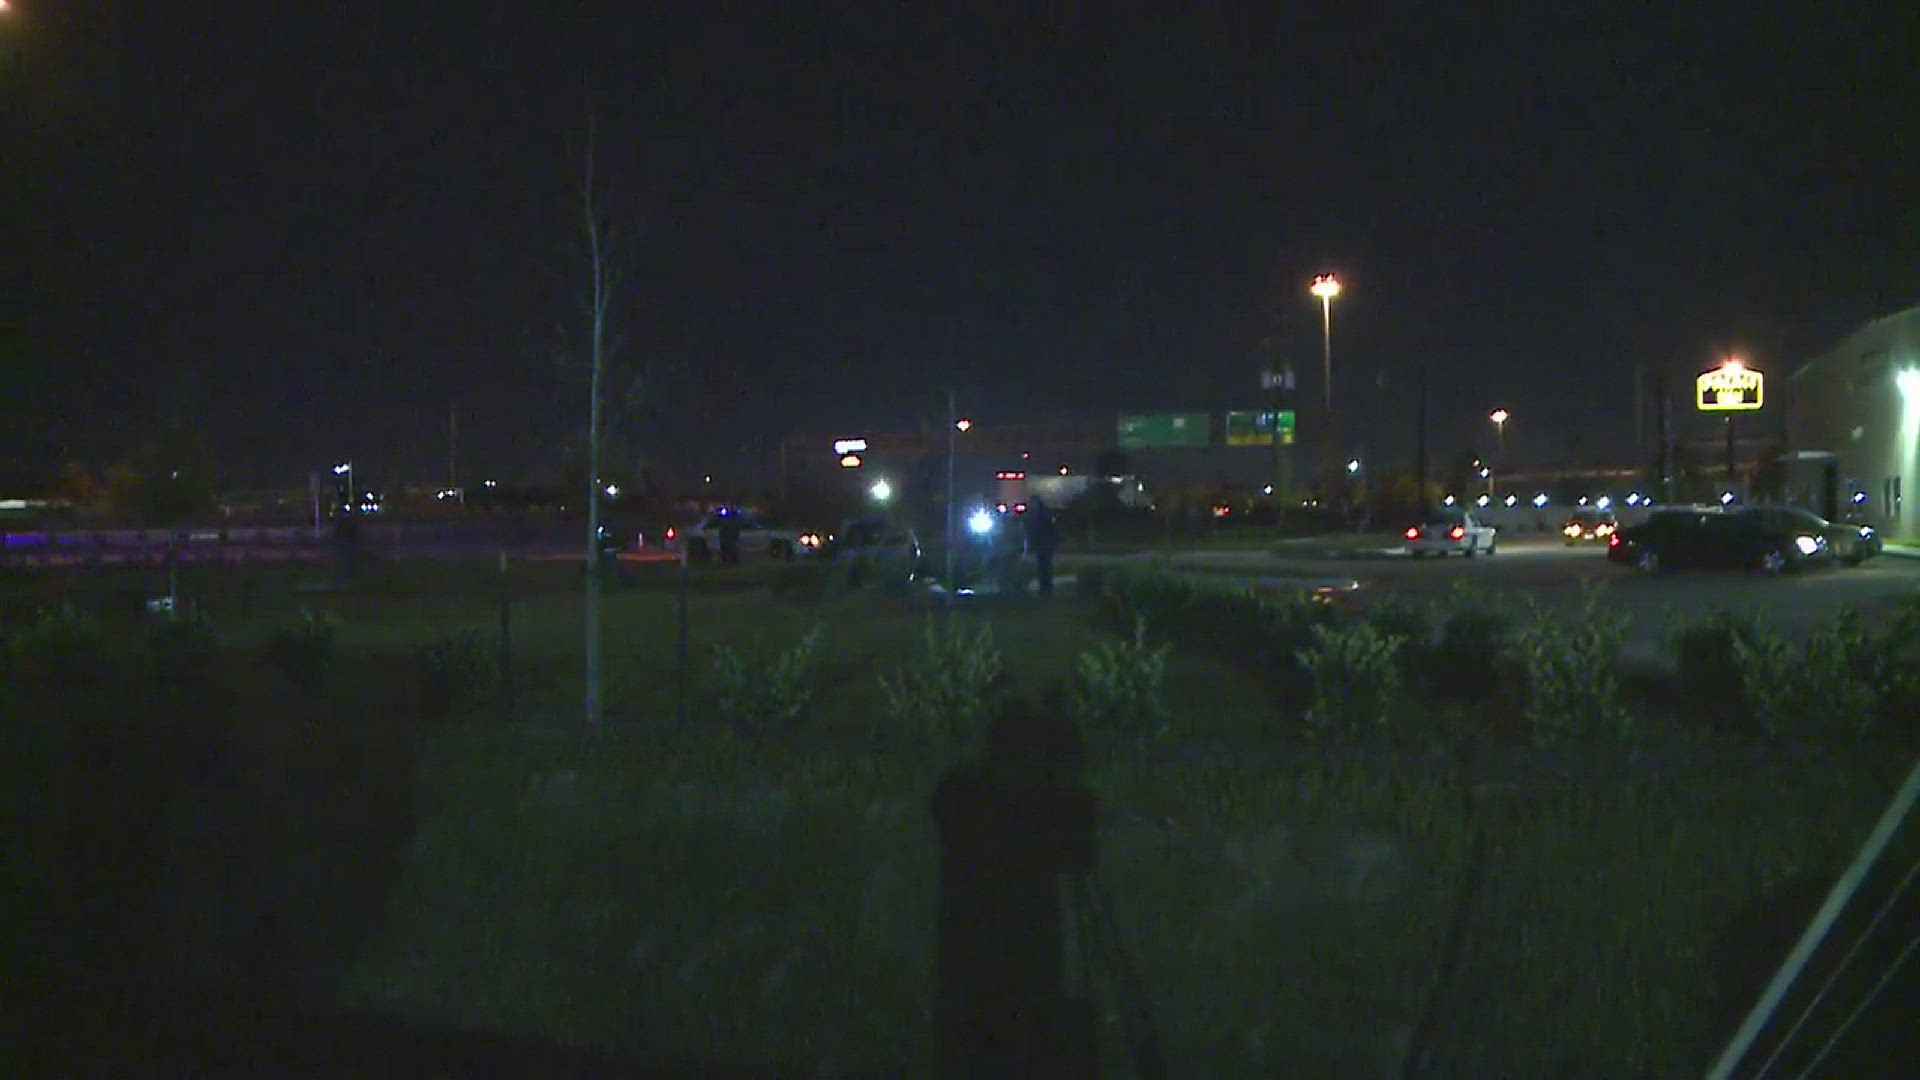 A man died in a fiery crash on the Eastex Freeway in northeast Houston overnight.